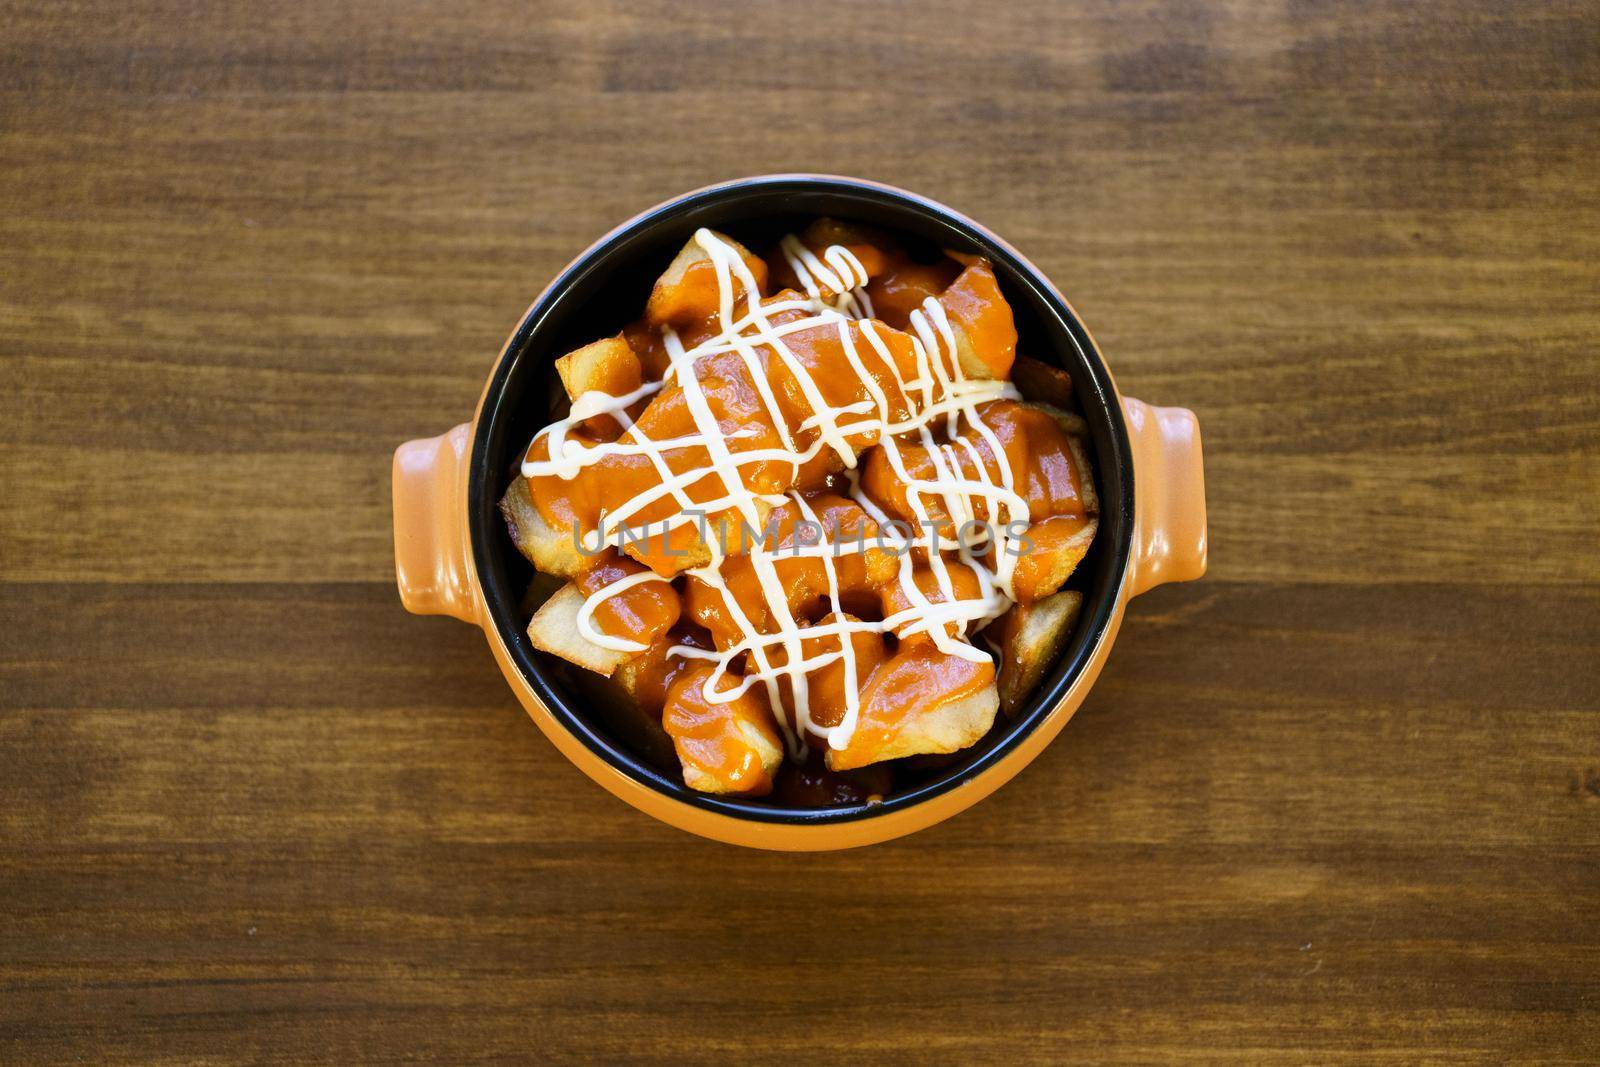 Top view of a delicious plate of patatas bravas, a typical Spanish dish, garnished with spicy sauce and served in a bowl on a wooden table in a restaurant.